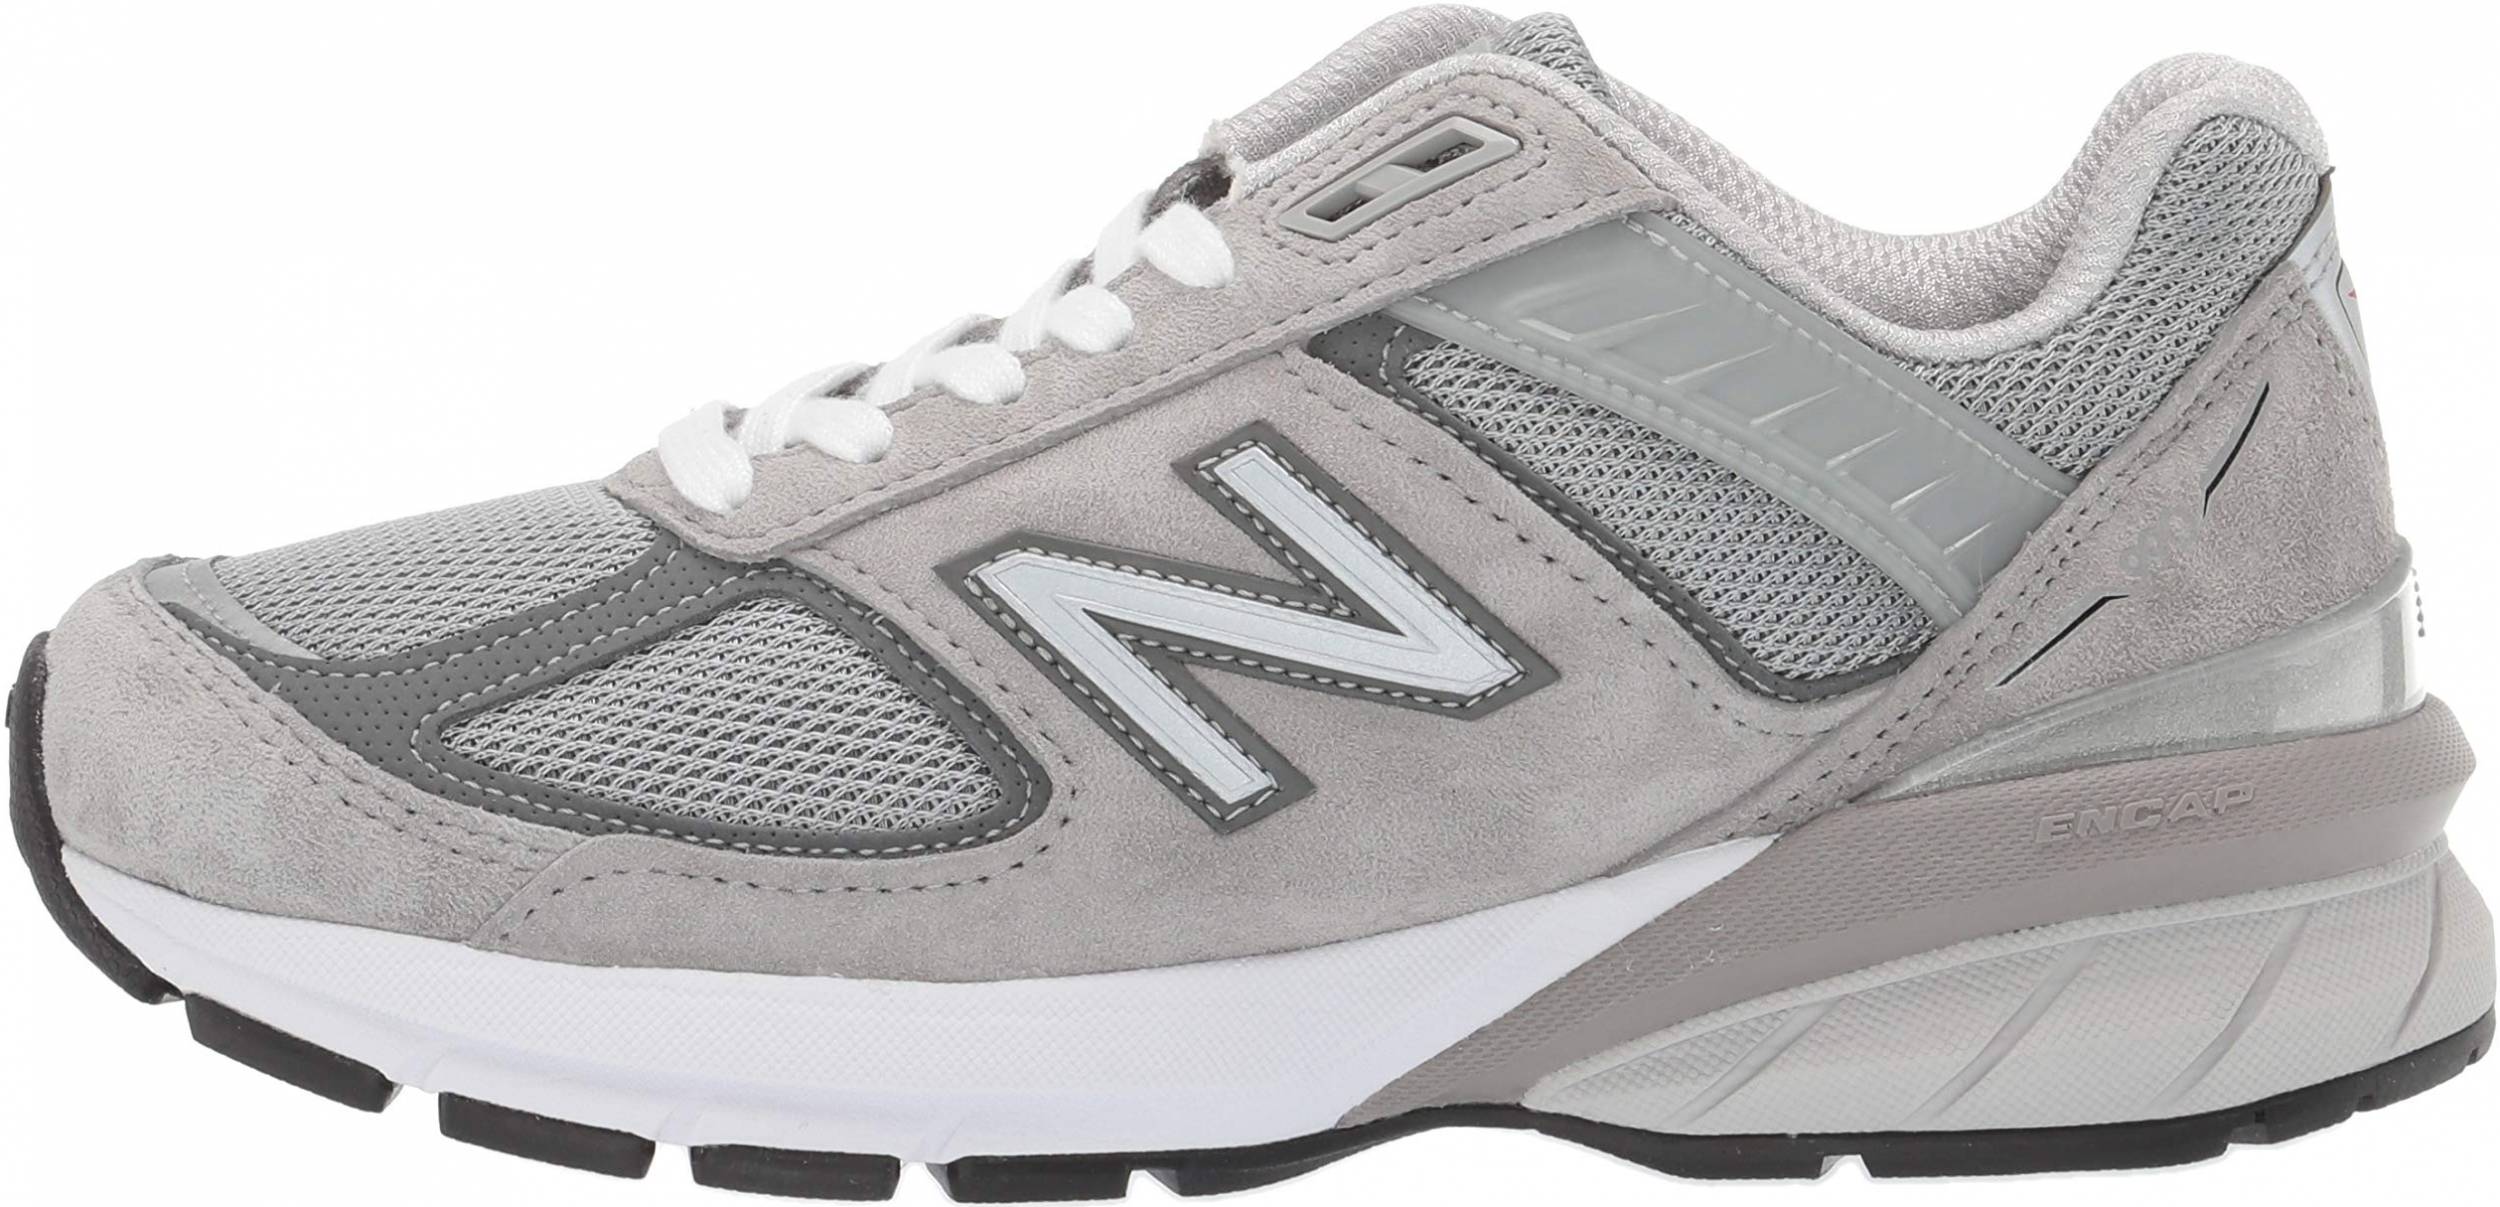 New Balance 990 v5 sneakers in 6 colors | RunRepeat